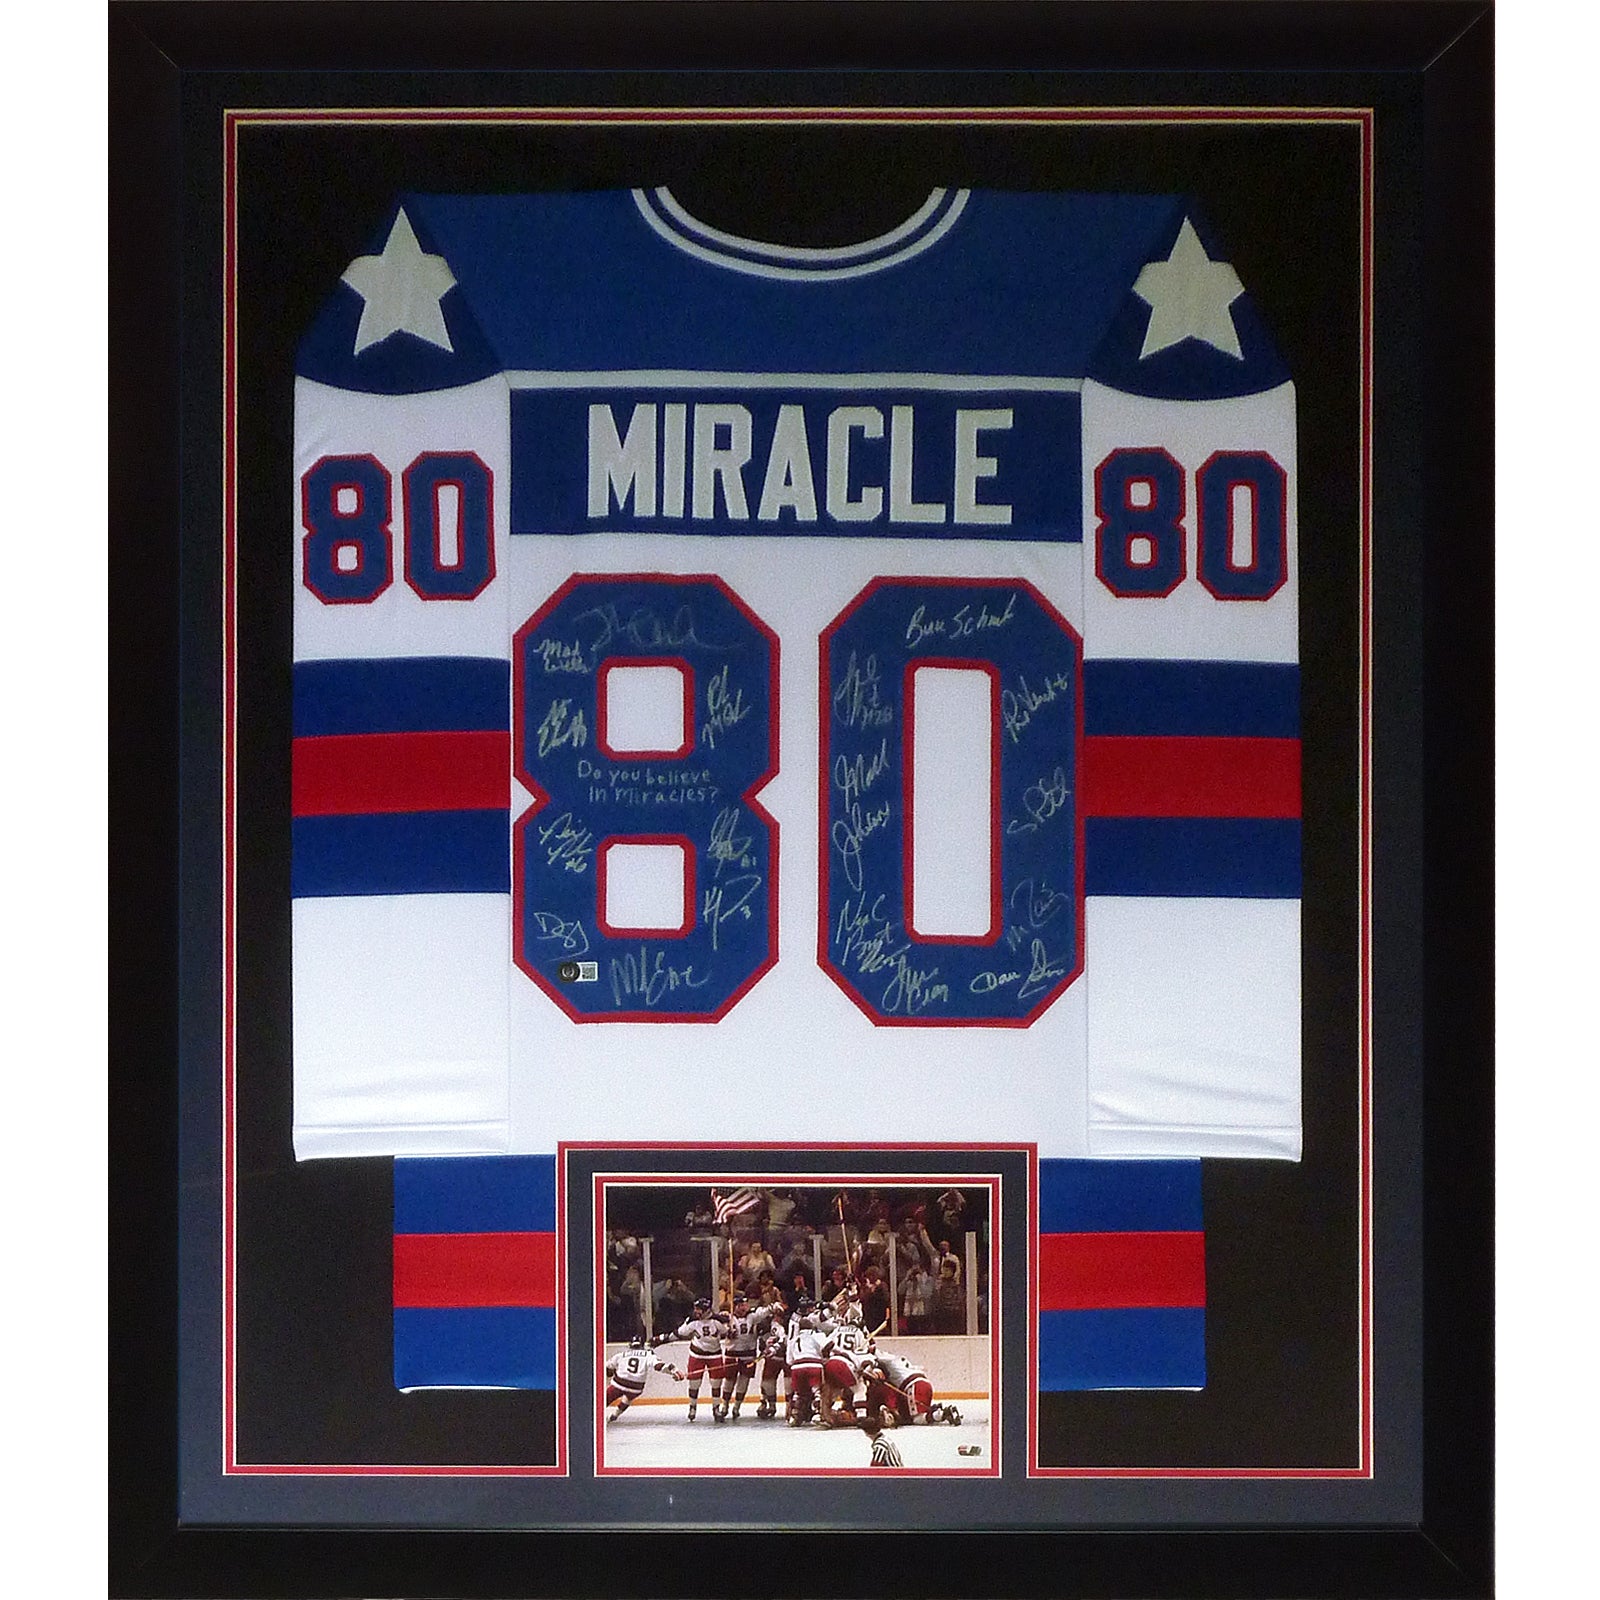 1980 U.S. Olympic Hockey Team Autographed (USA White #80) Deluxe Framed  Jersey – Miracle On Ice - 19 Team Member Signatures – Beckett Witnessed